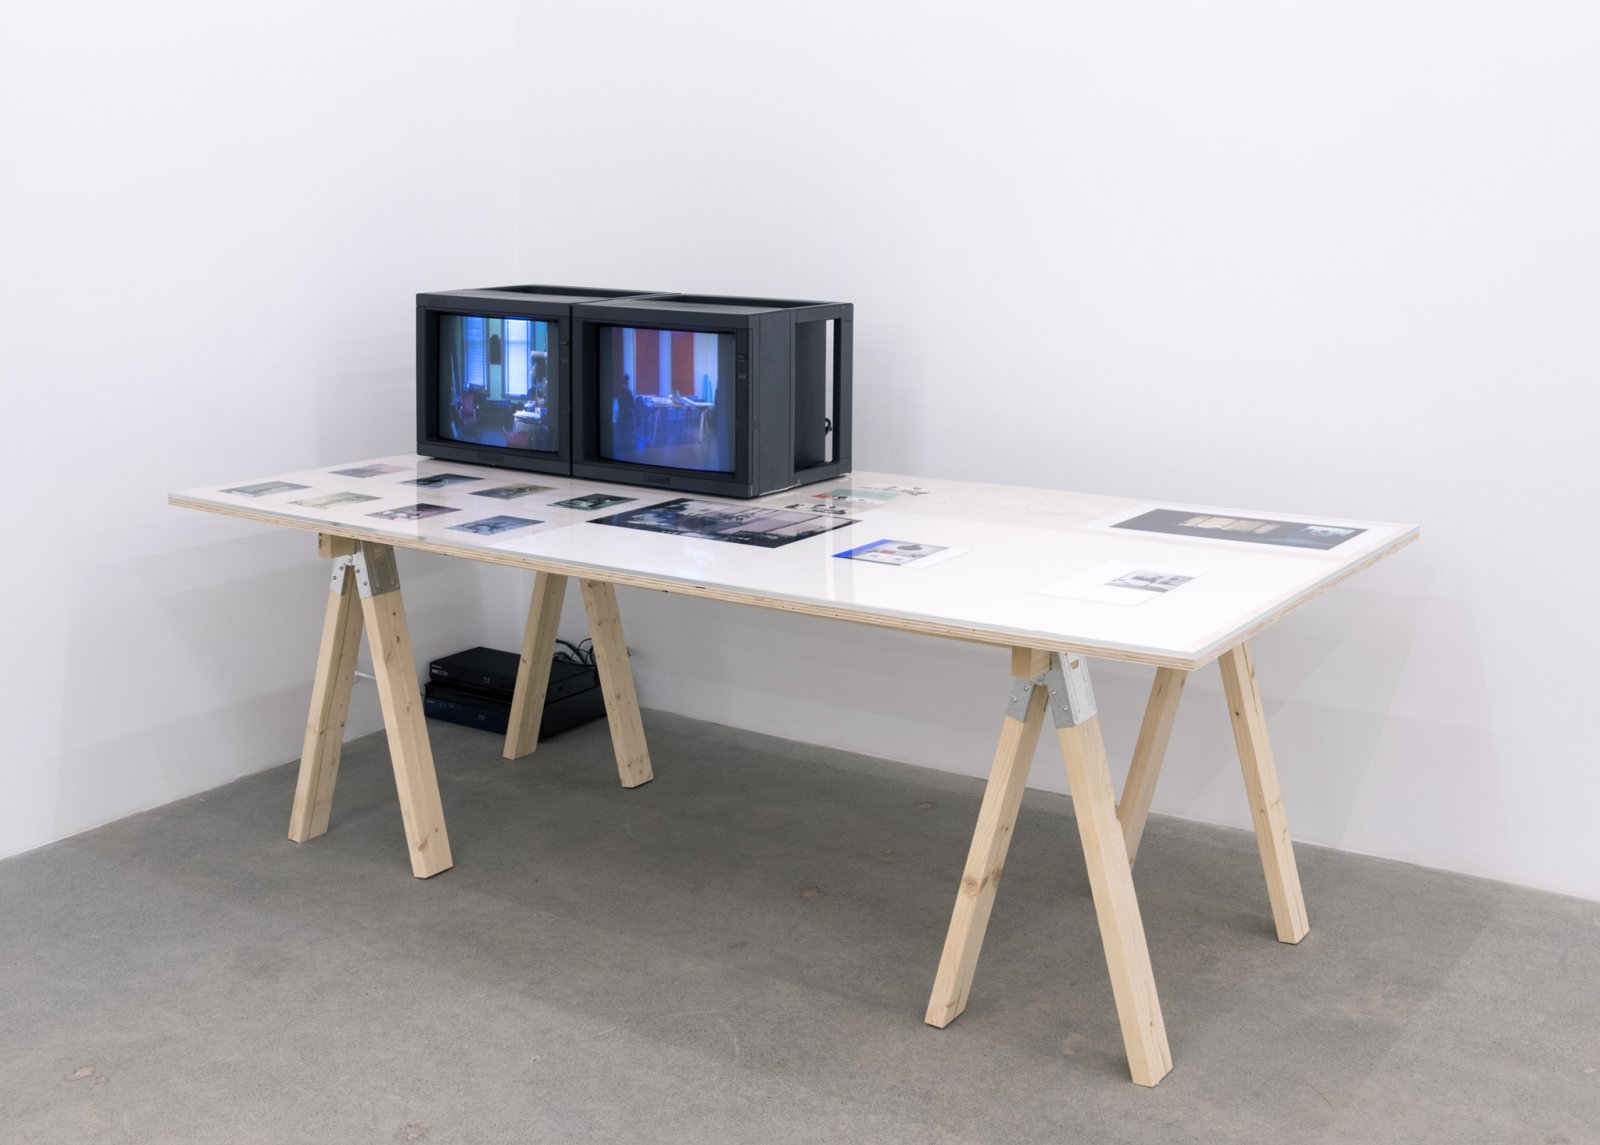 Ian Wallace, installation view, Street Floor Table Page Wall Canvas, 1969-2017, Catriona Jeffries, 2017​ by Ian Wallace